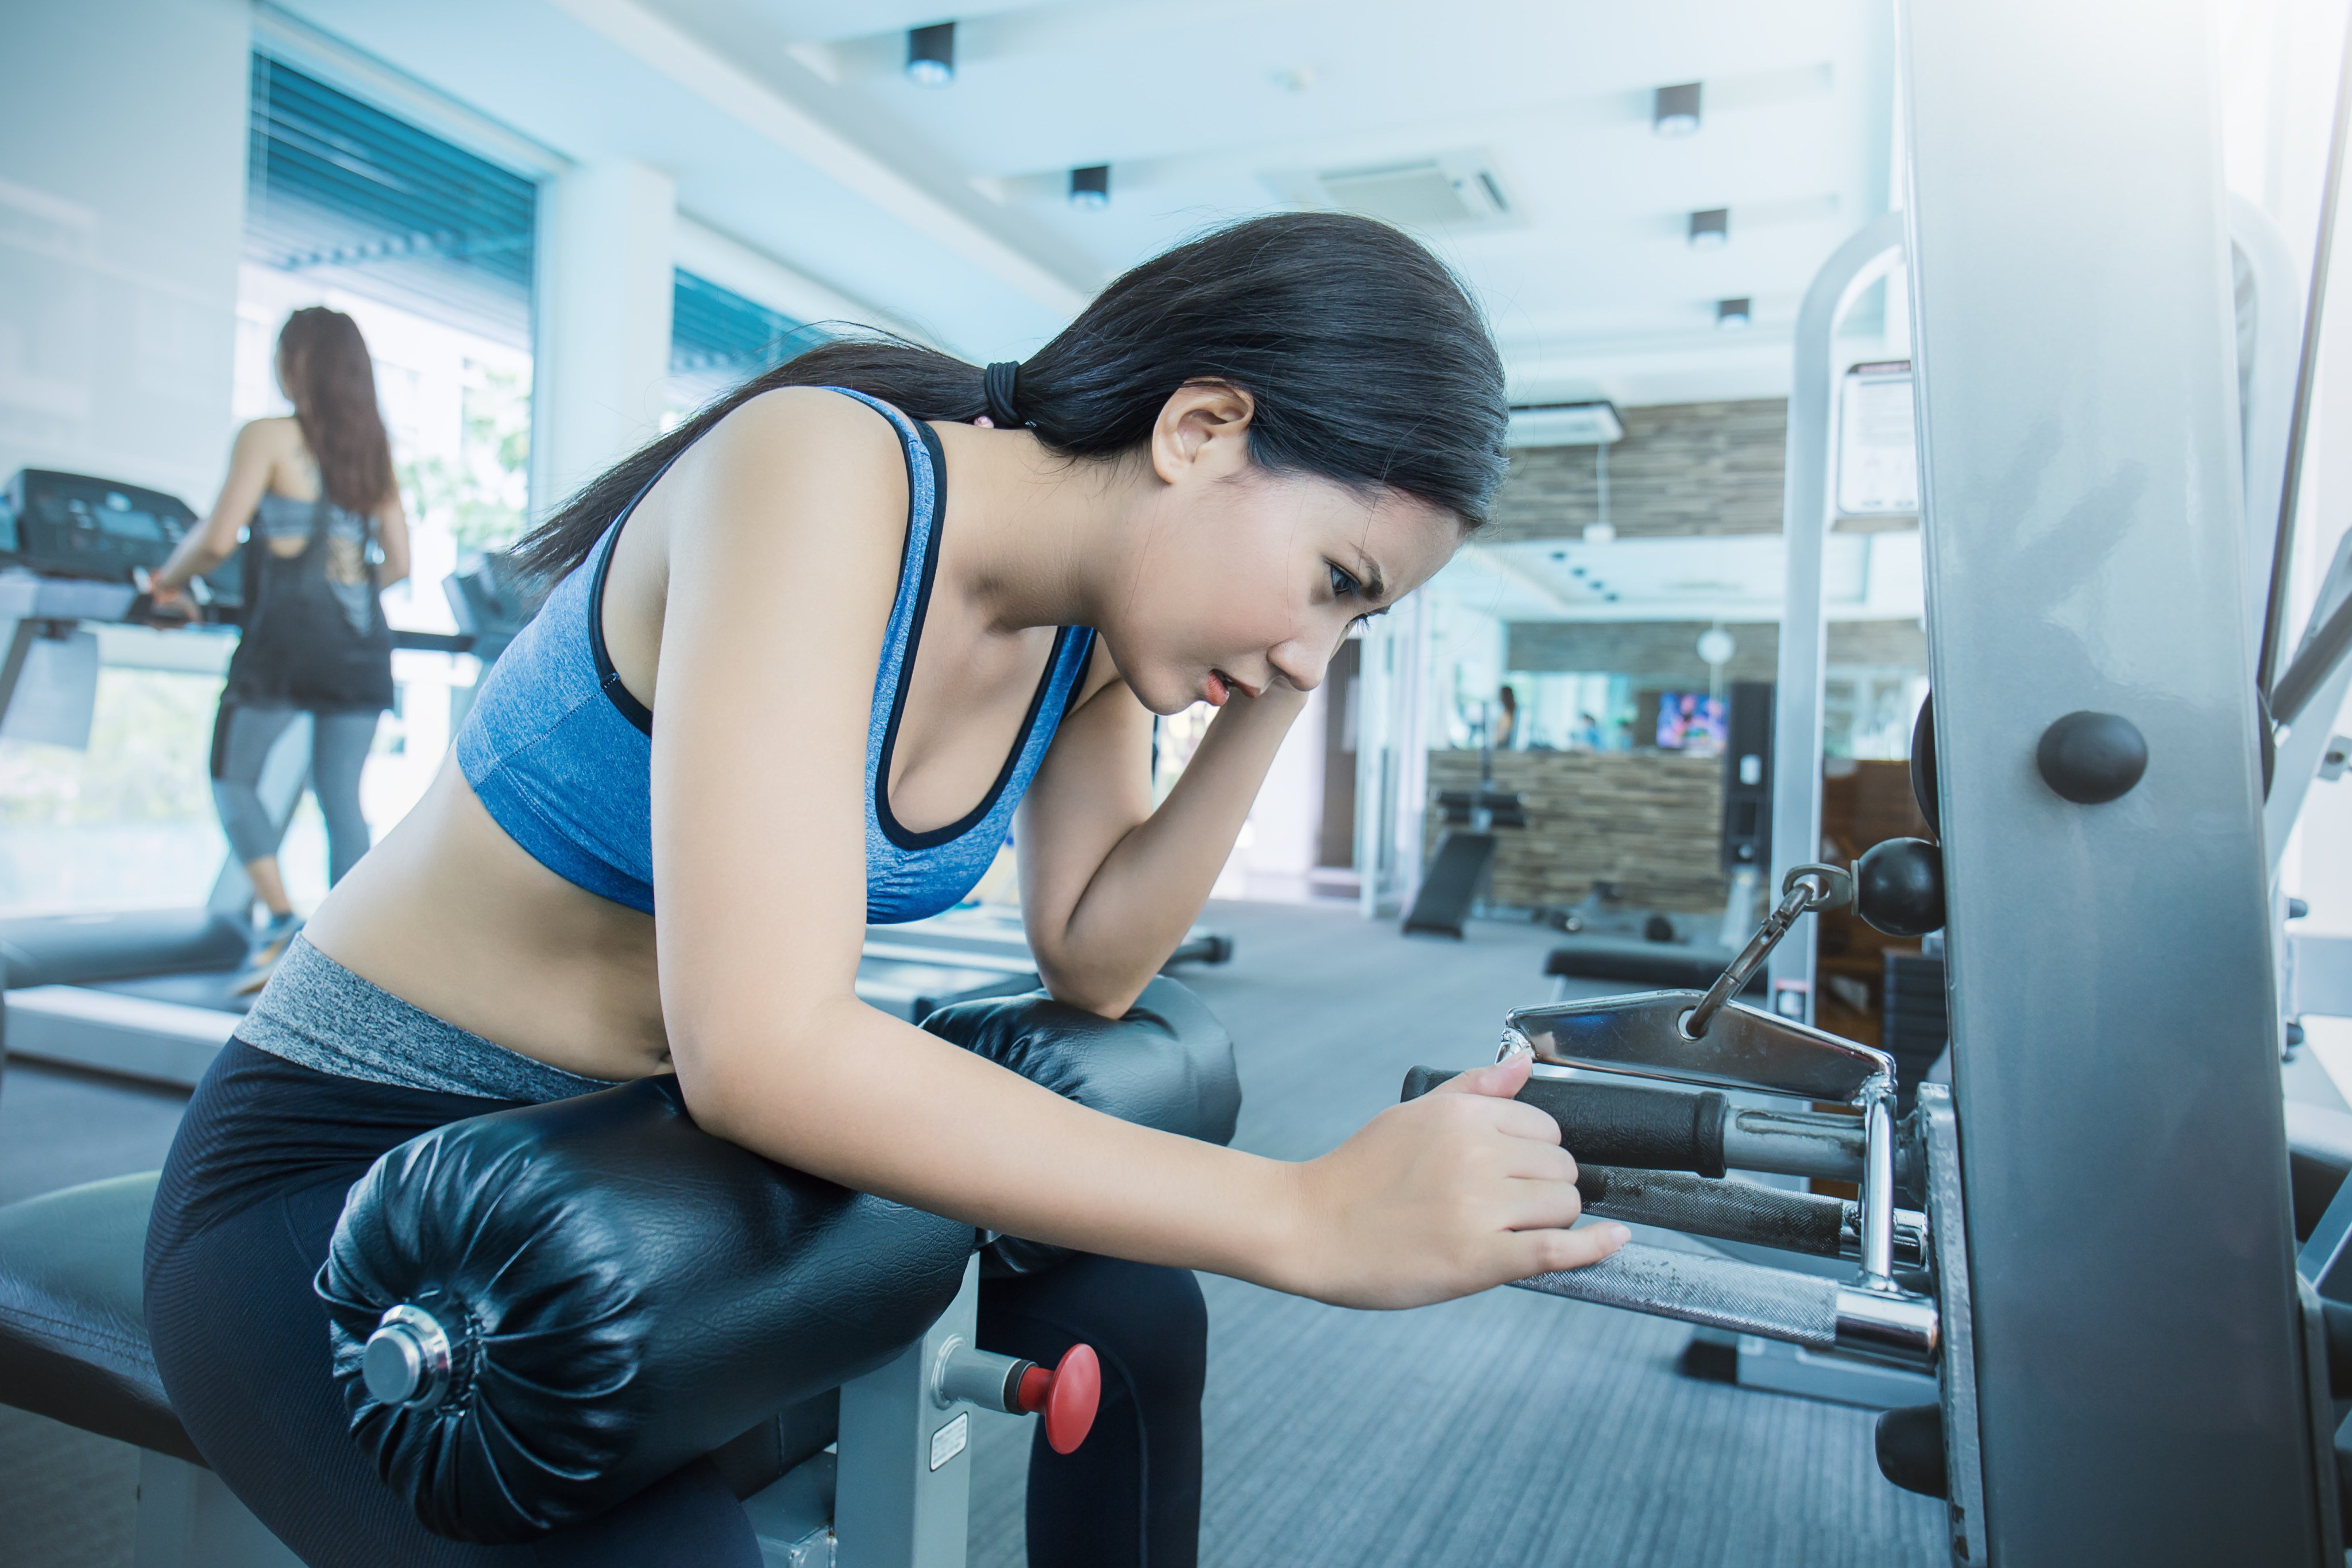 “Gymtimidation” strikes people – mostly women – who fear going into fitness centres dominated by beefy men and where they may not know how to use some of the equipment. Experts offer tips on how to get fit anyway.  Photo: Shutterstock
